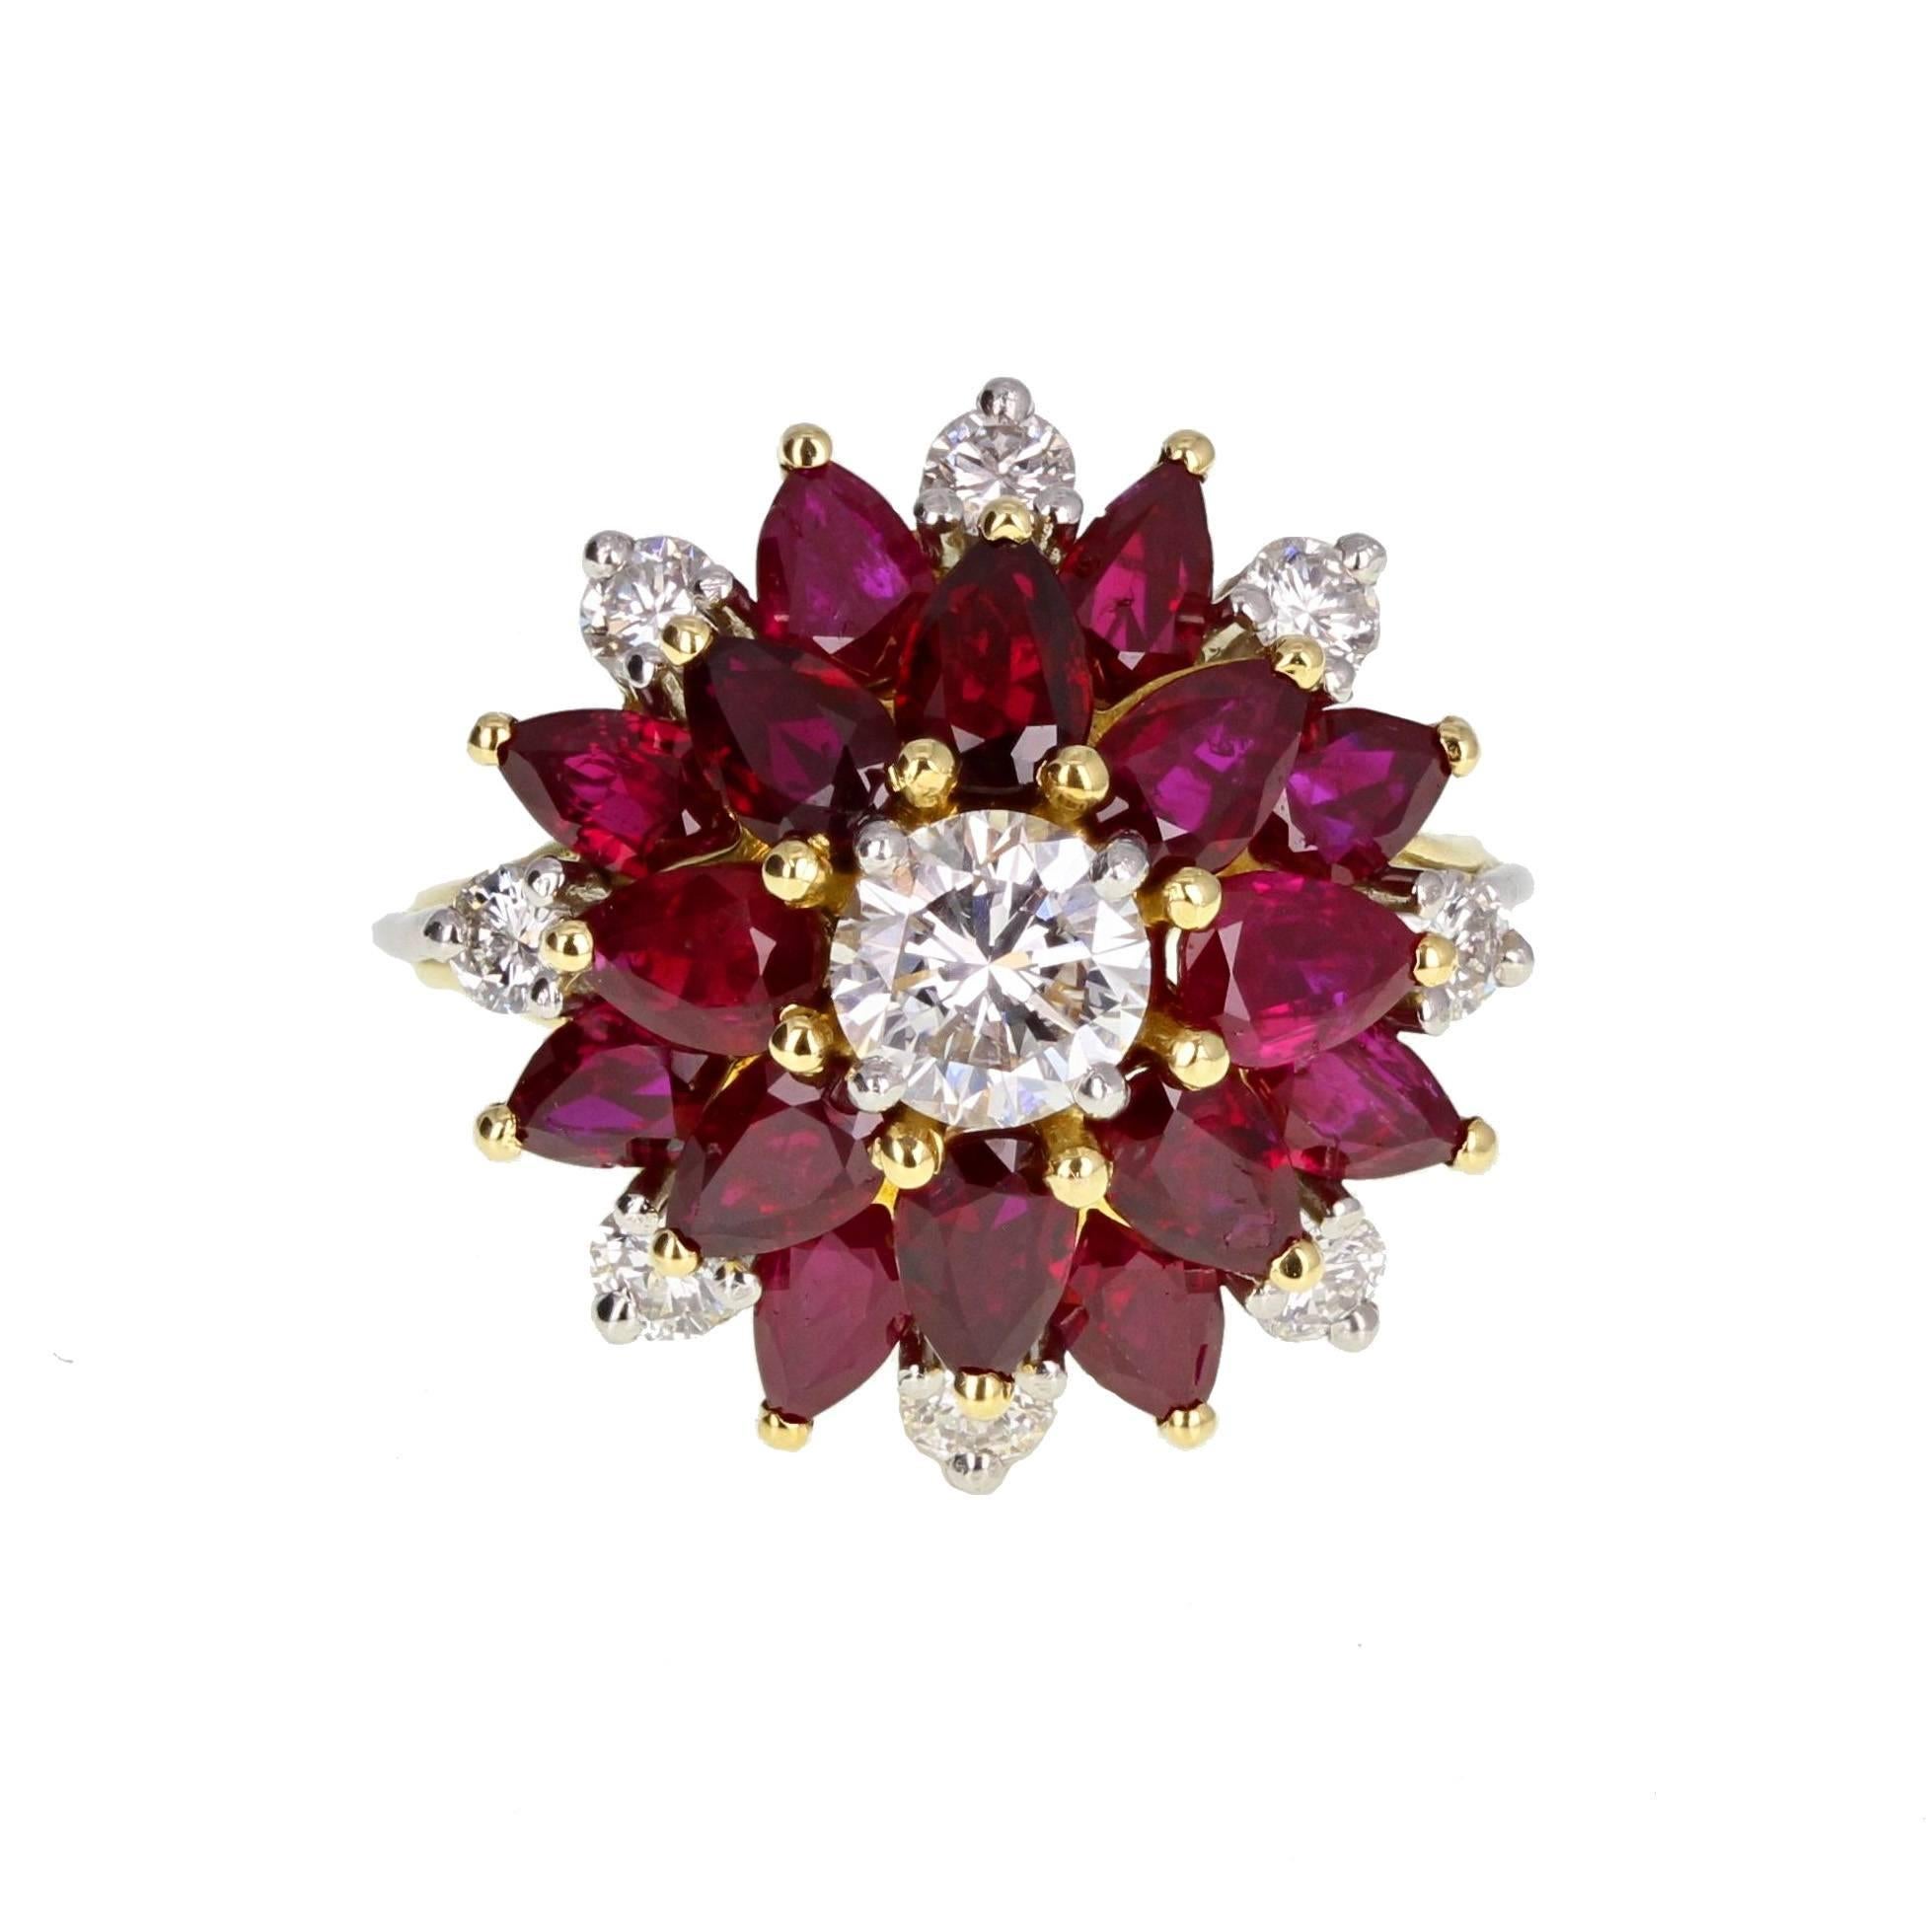 A fine and impressive cluster ring featuring high quality gemstones. Comprising a central half-carat brilliant cut diamond, mounted in claws, surrounded by pear-shaped rubies to form a flower shaped cluster. Accented with smaller diamonds. White and